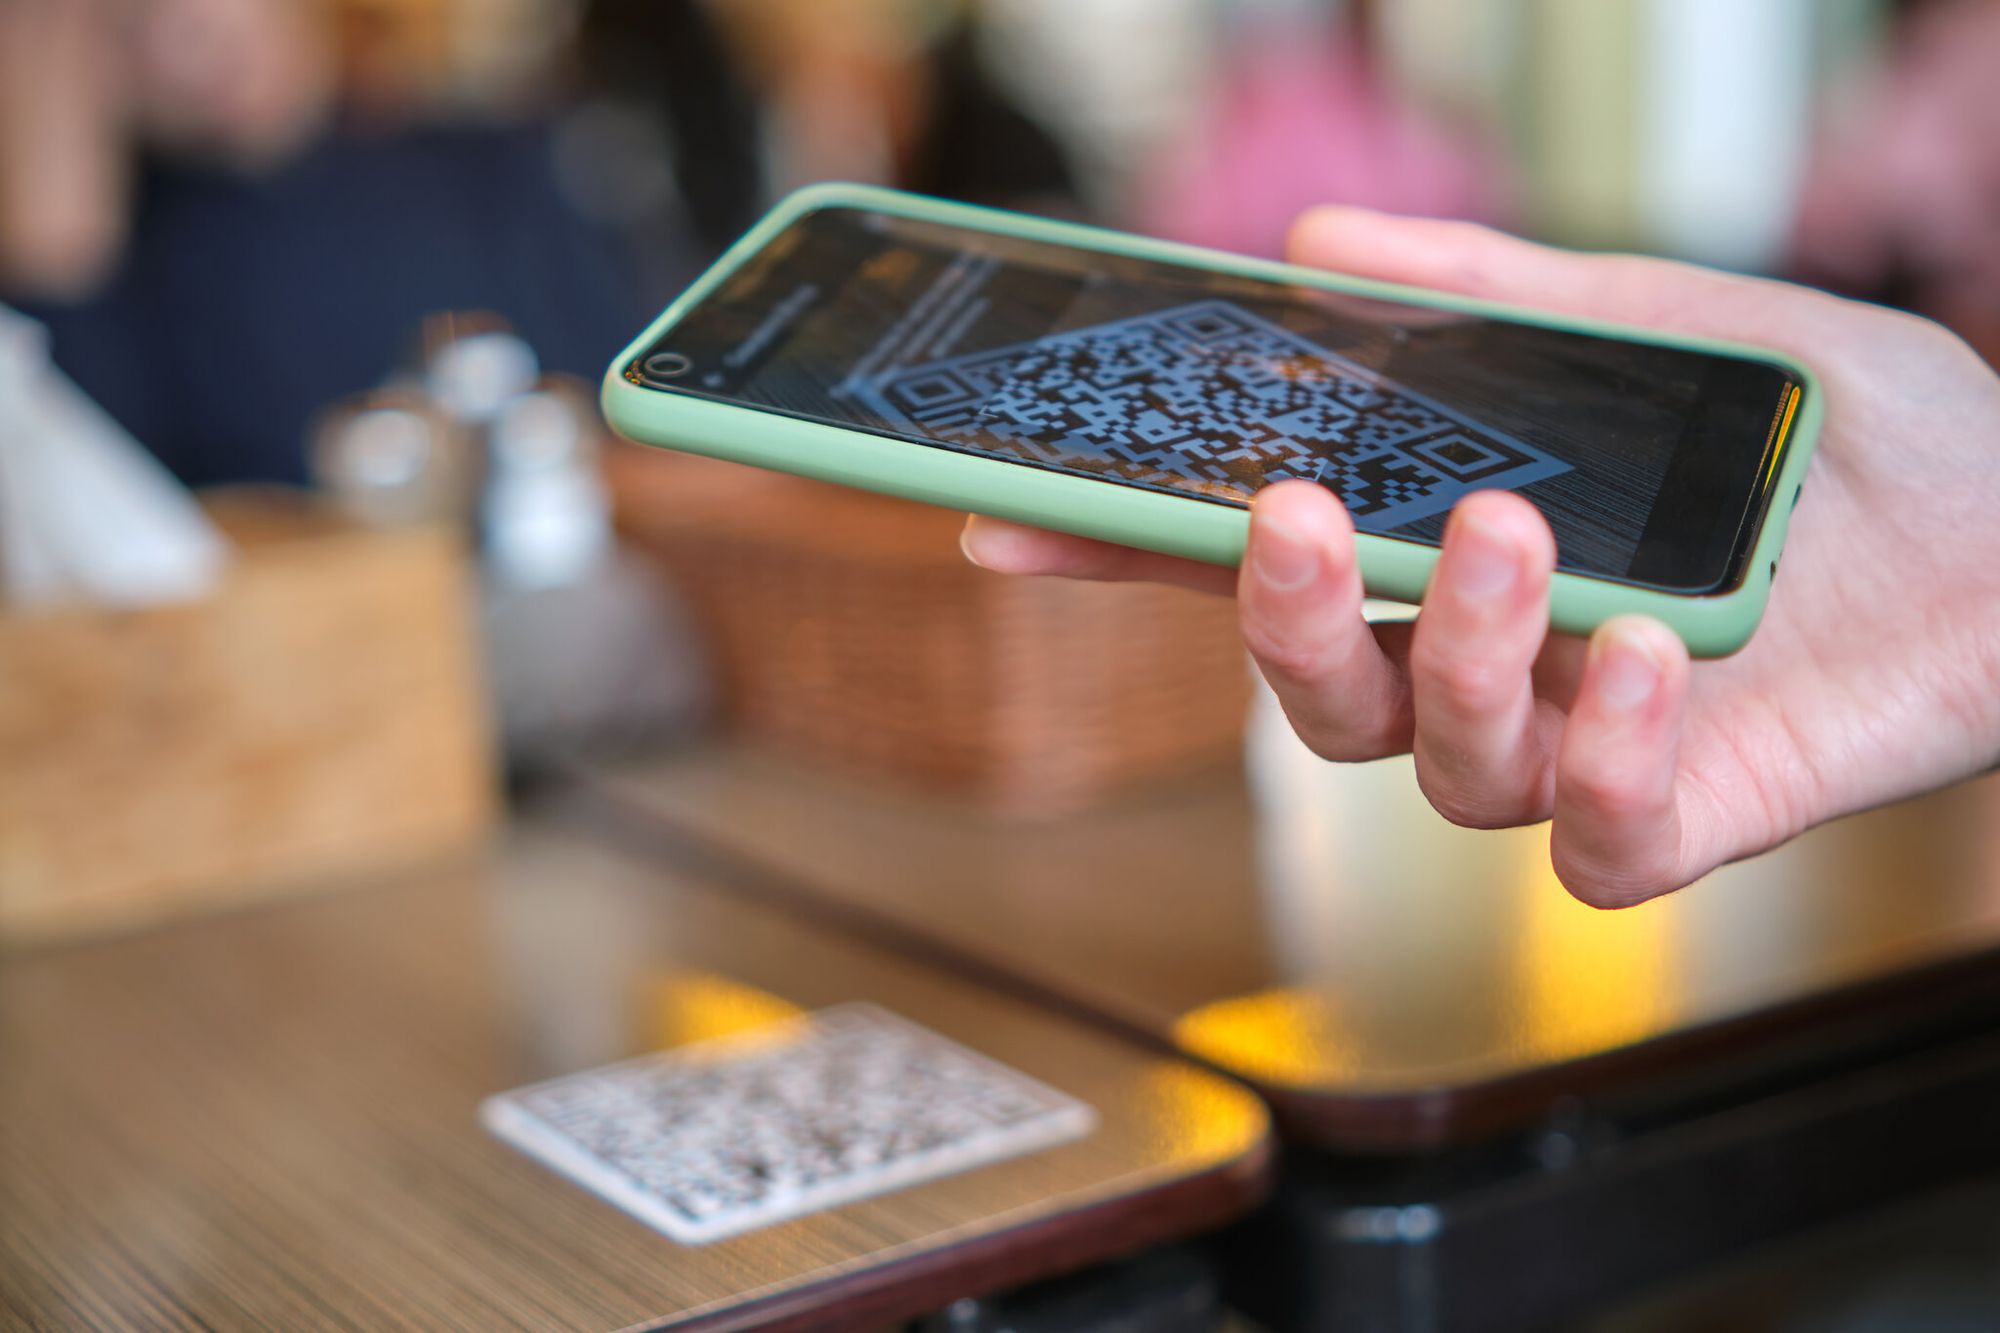 a close up of a hand scanning a QR code on a table